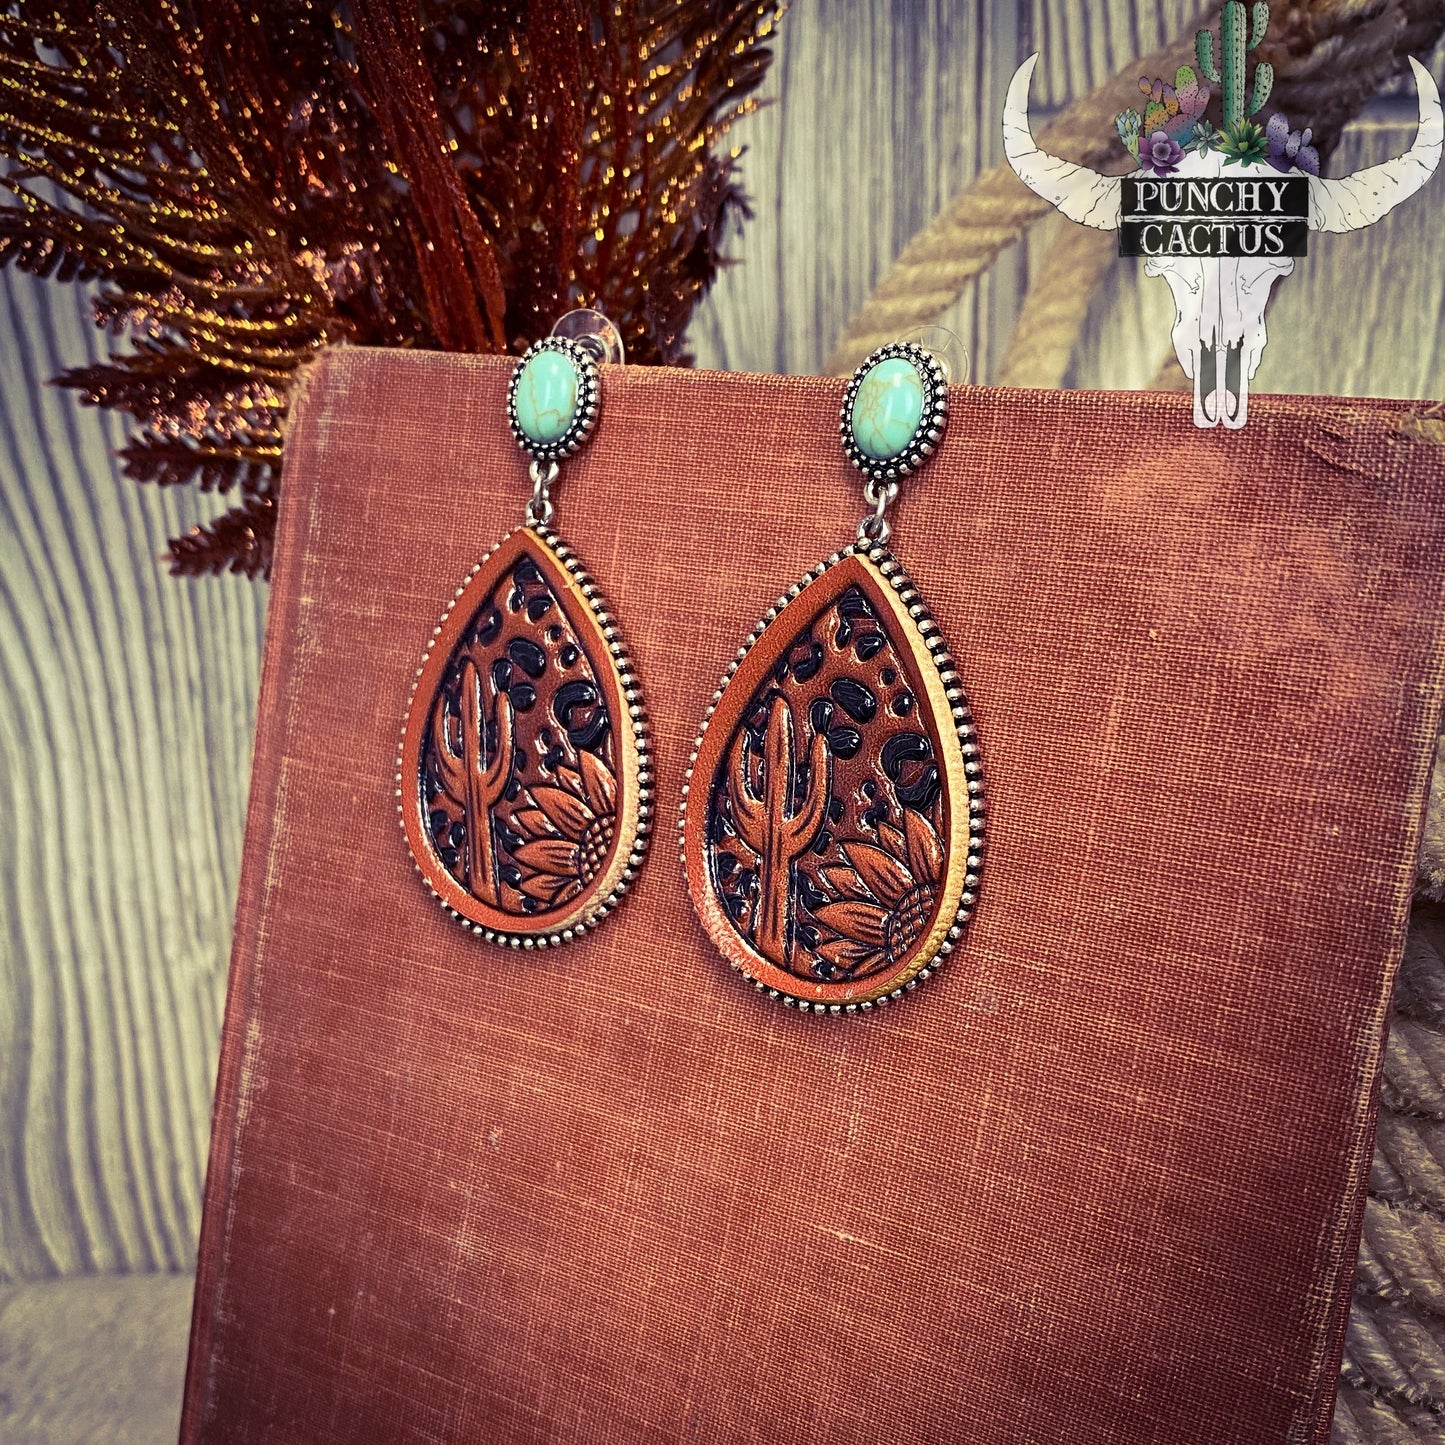 Western leather tooled earrings. Tooled leather is tear drop shaped. Tooled into the leather is a cactus and a sunflower, with a cheetah print back ground.